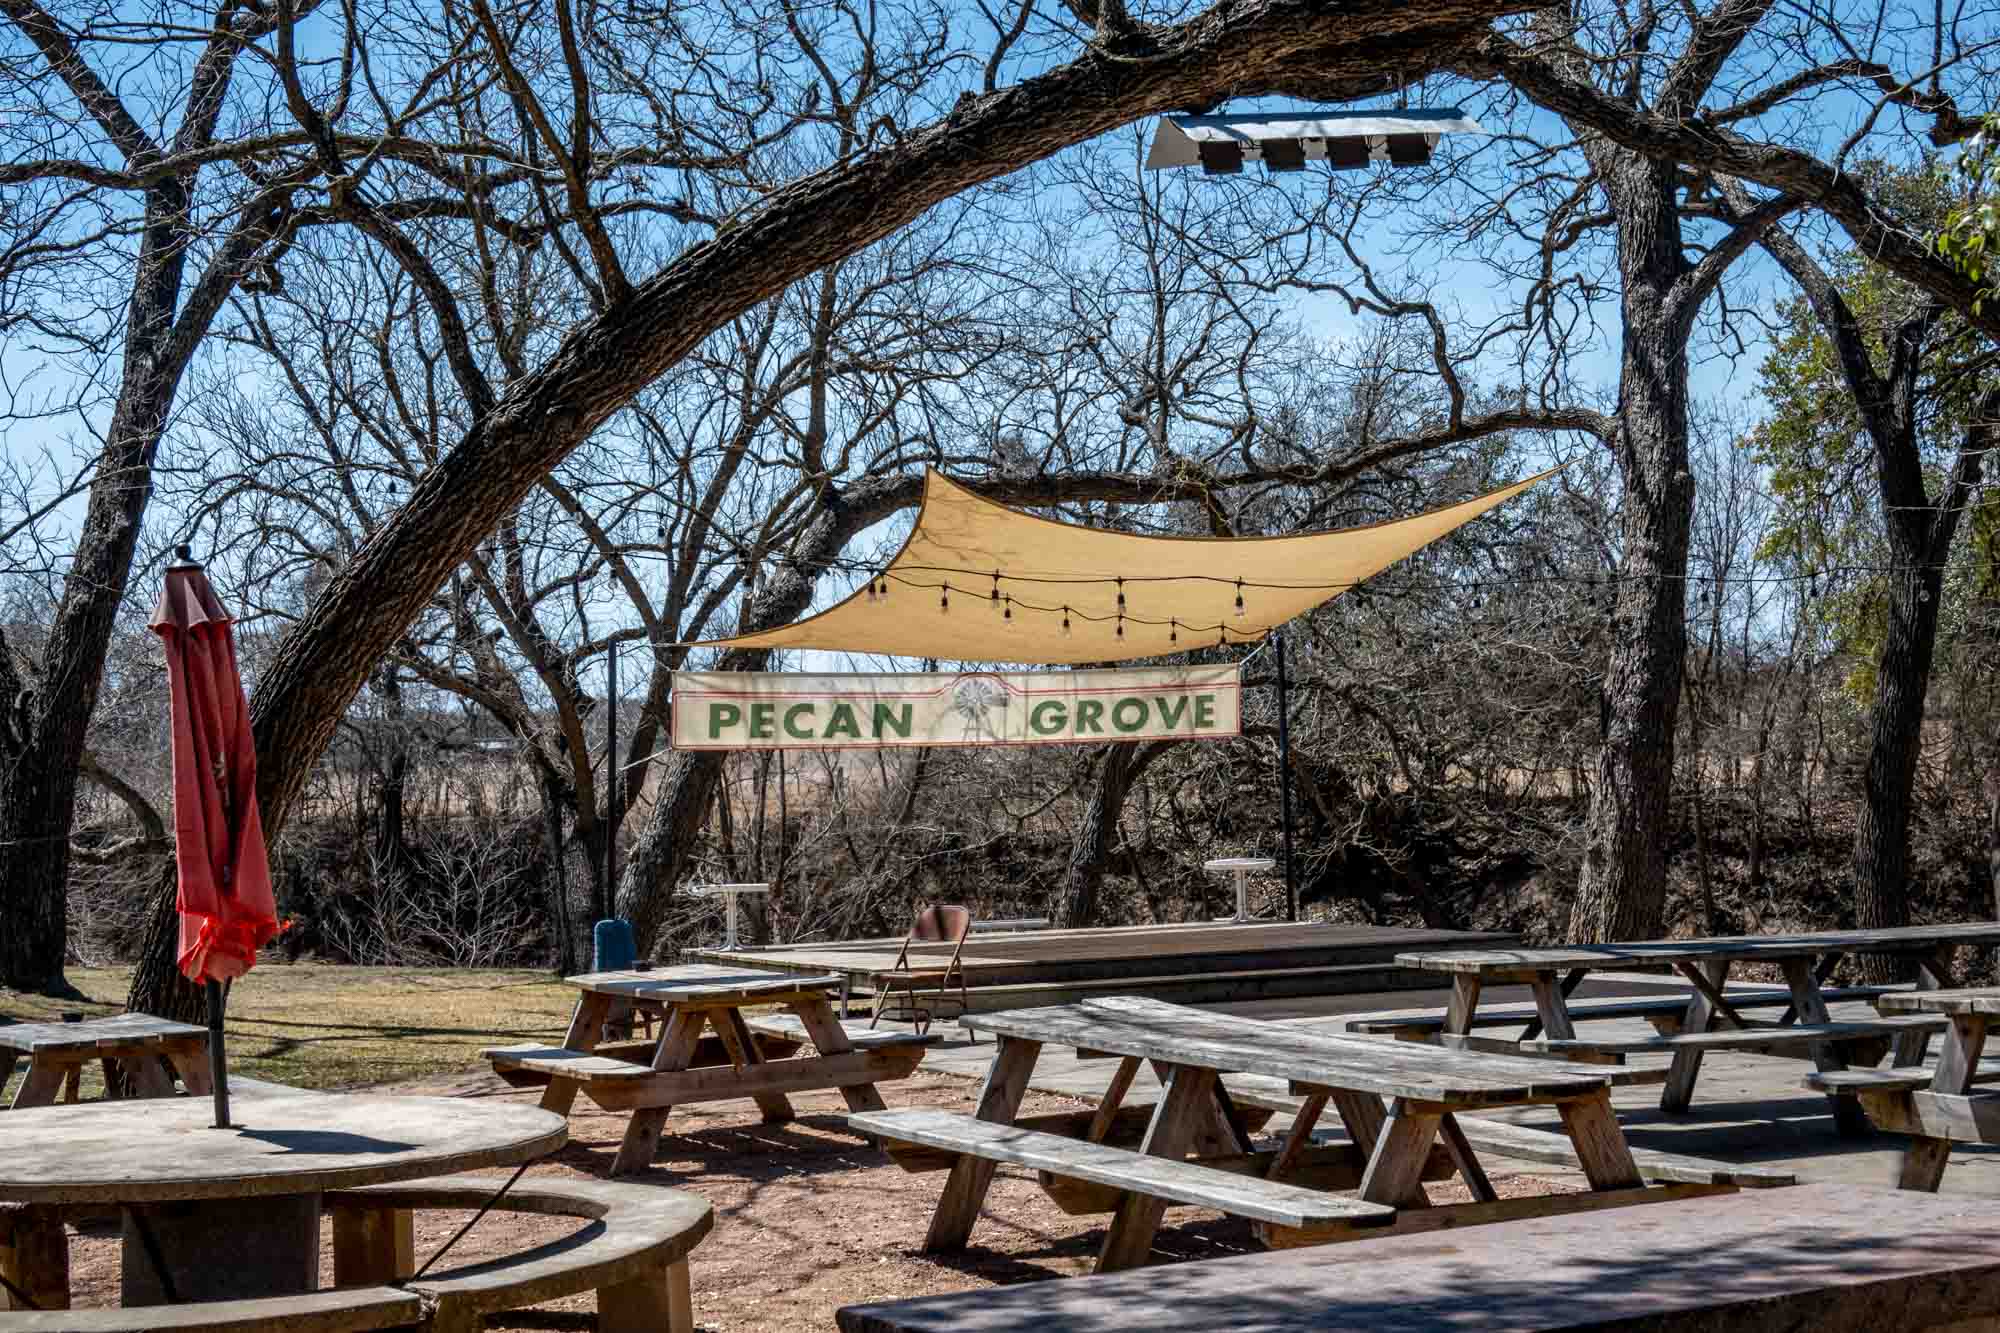 Picnic tables under trees with a wooden stage and sign for "Pecan Grove."